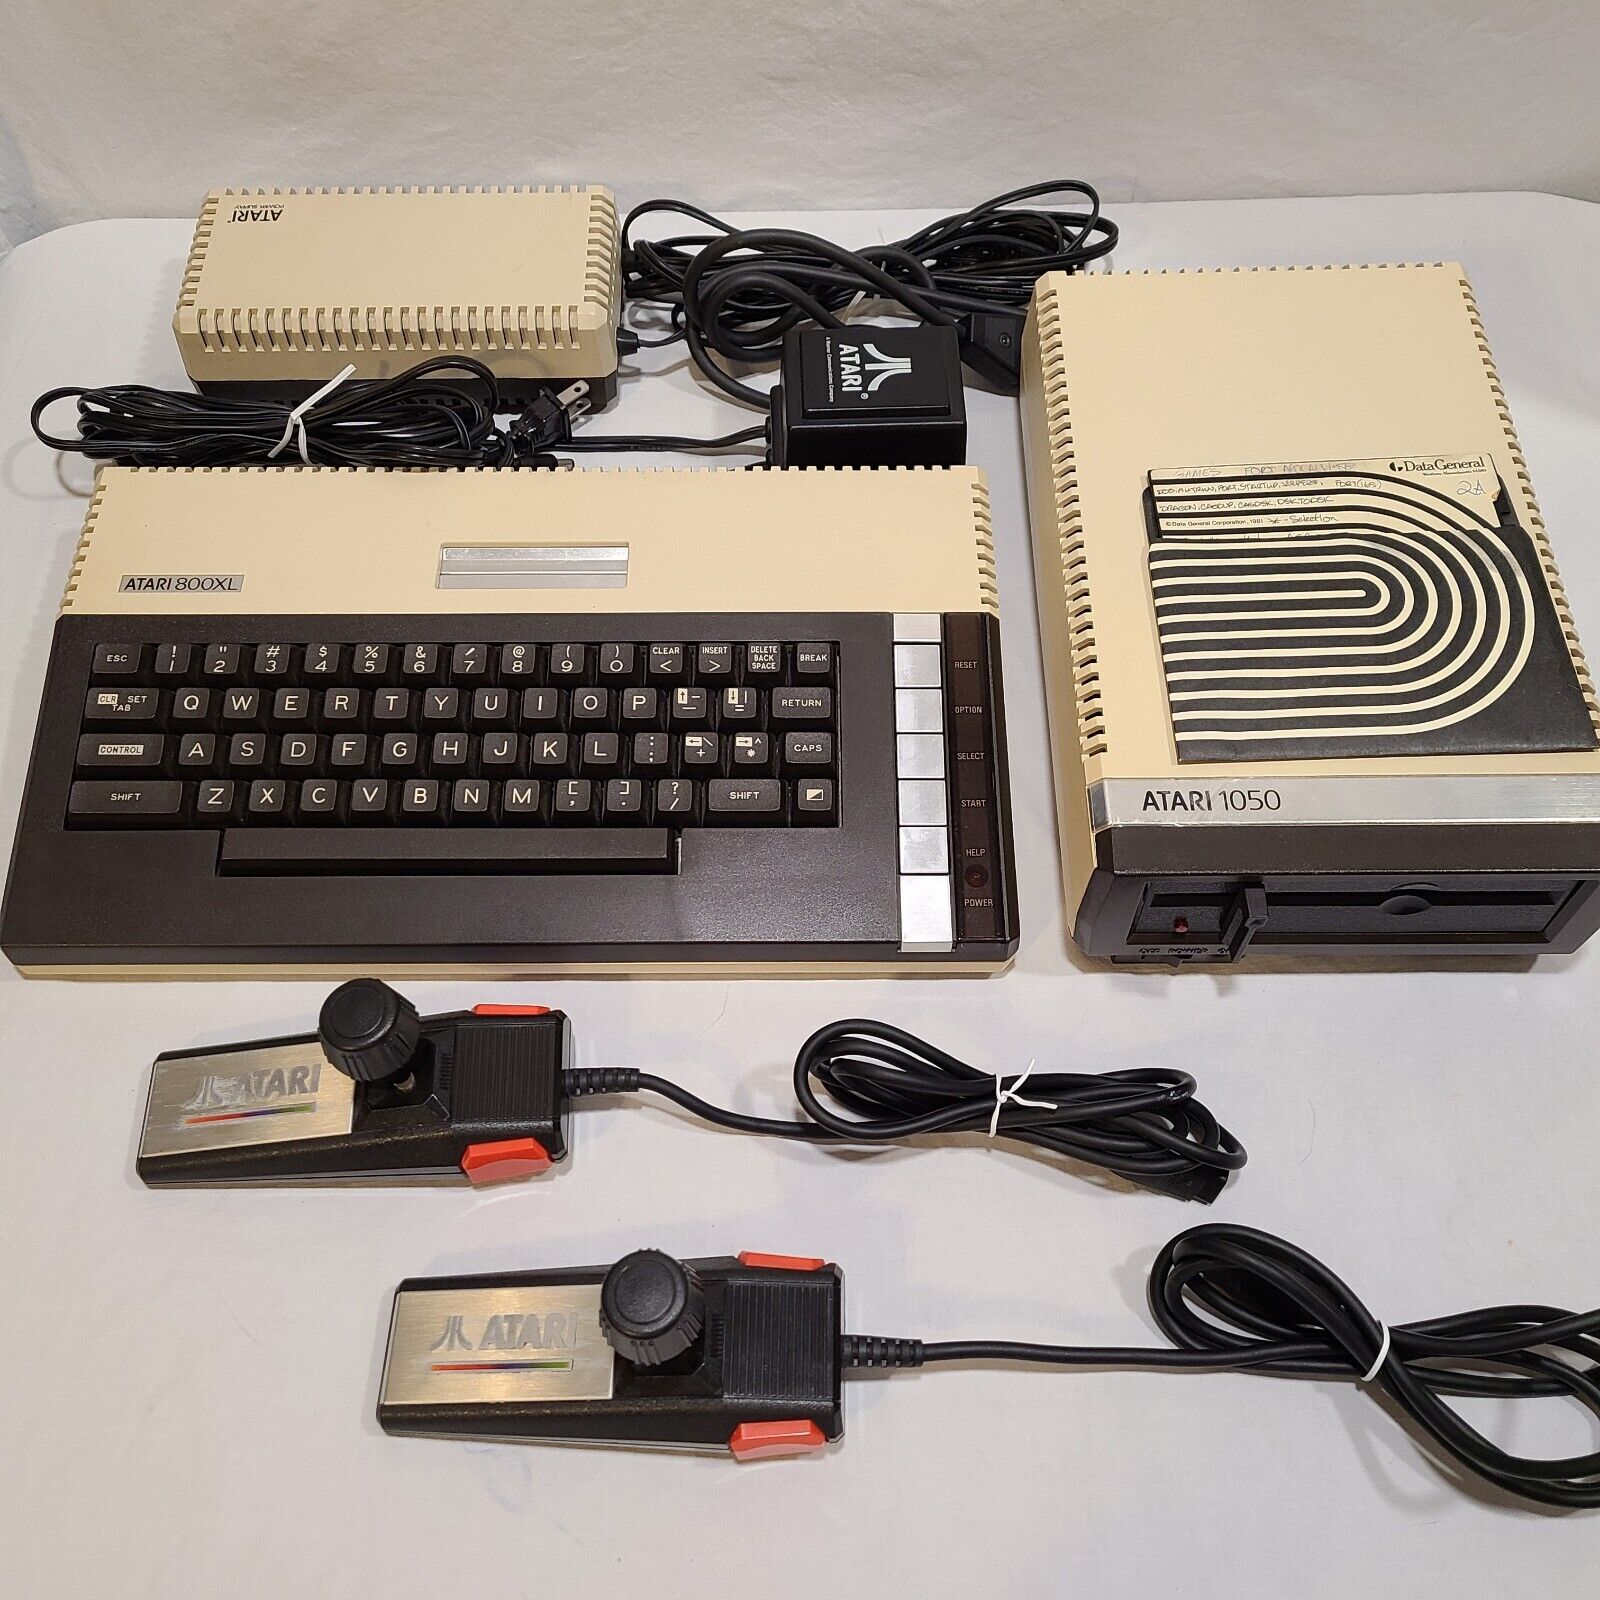 ATARI 800XL Home Computer With 1050 Disk Drive, Joysticks Tested and Working